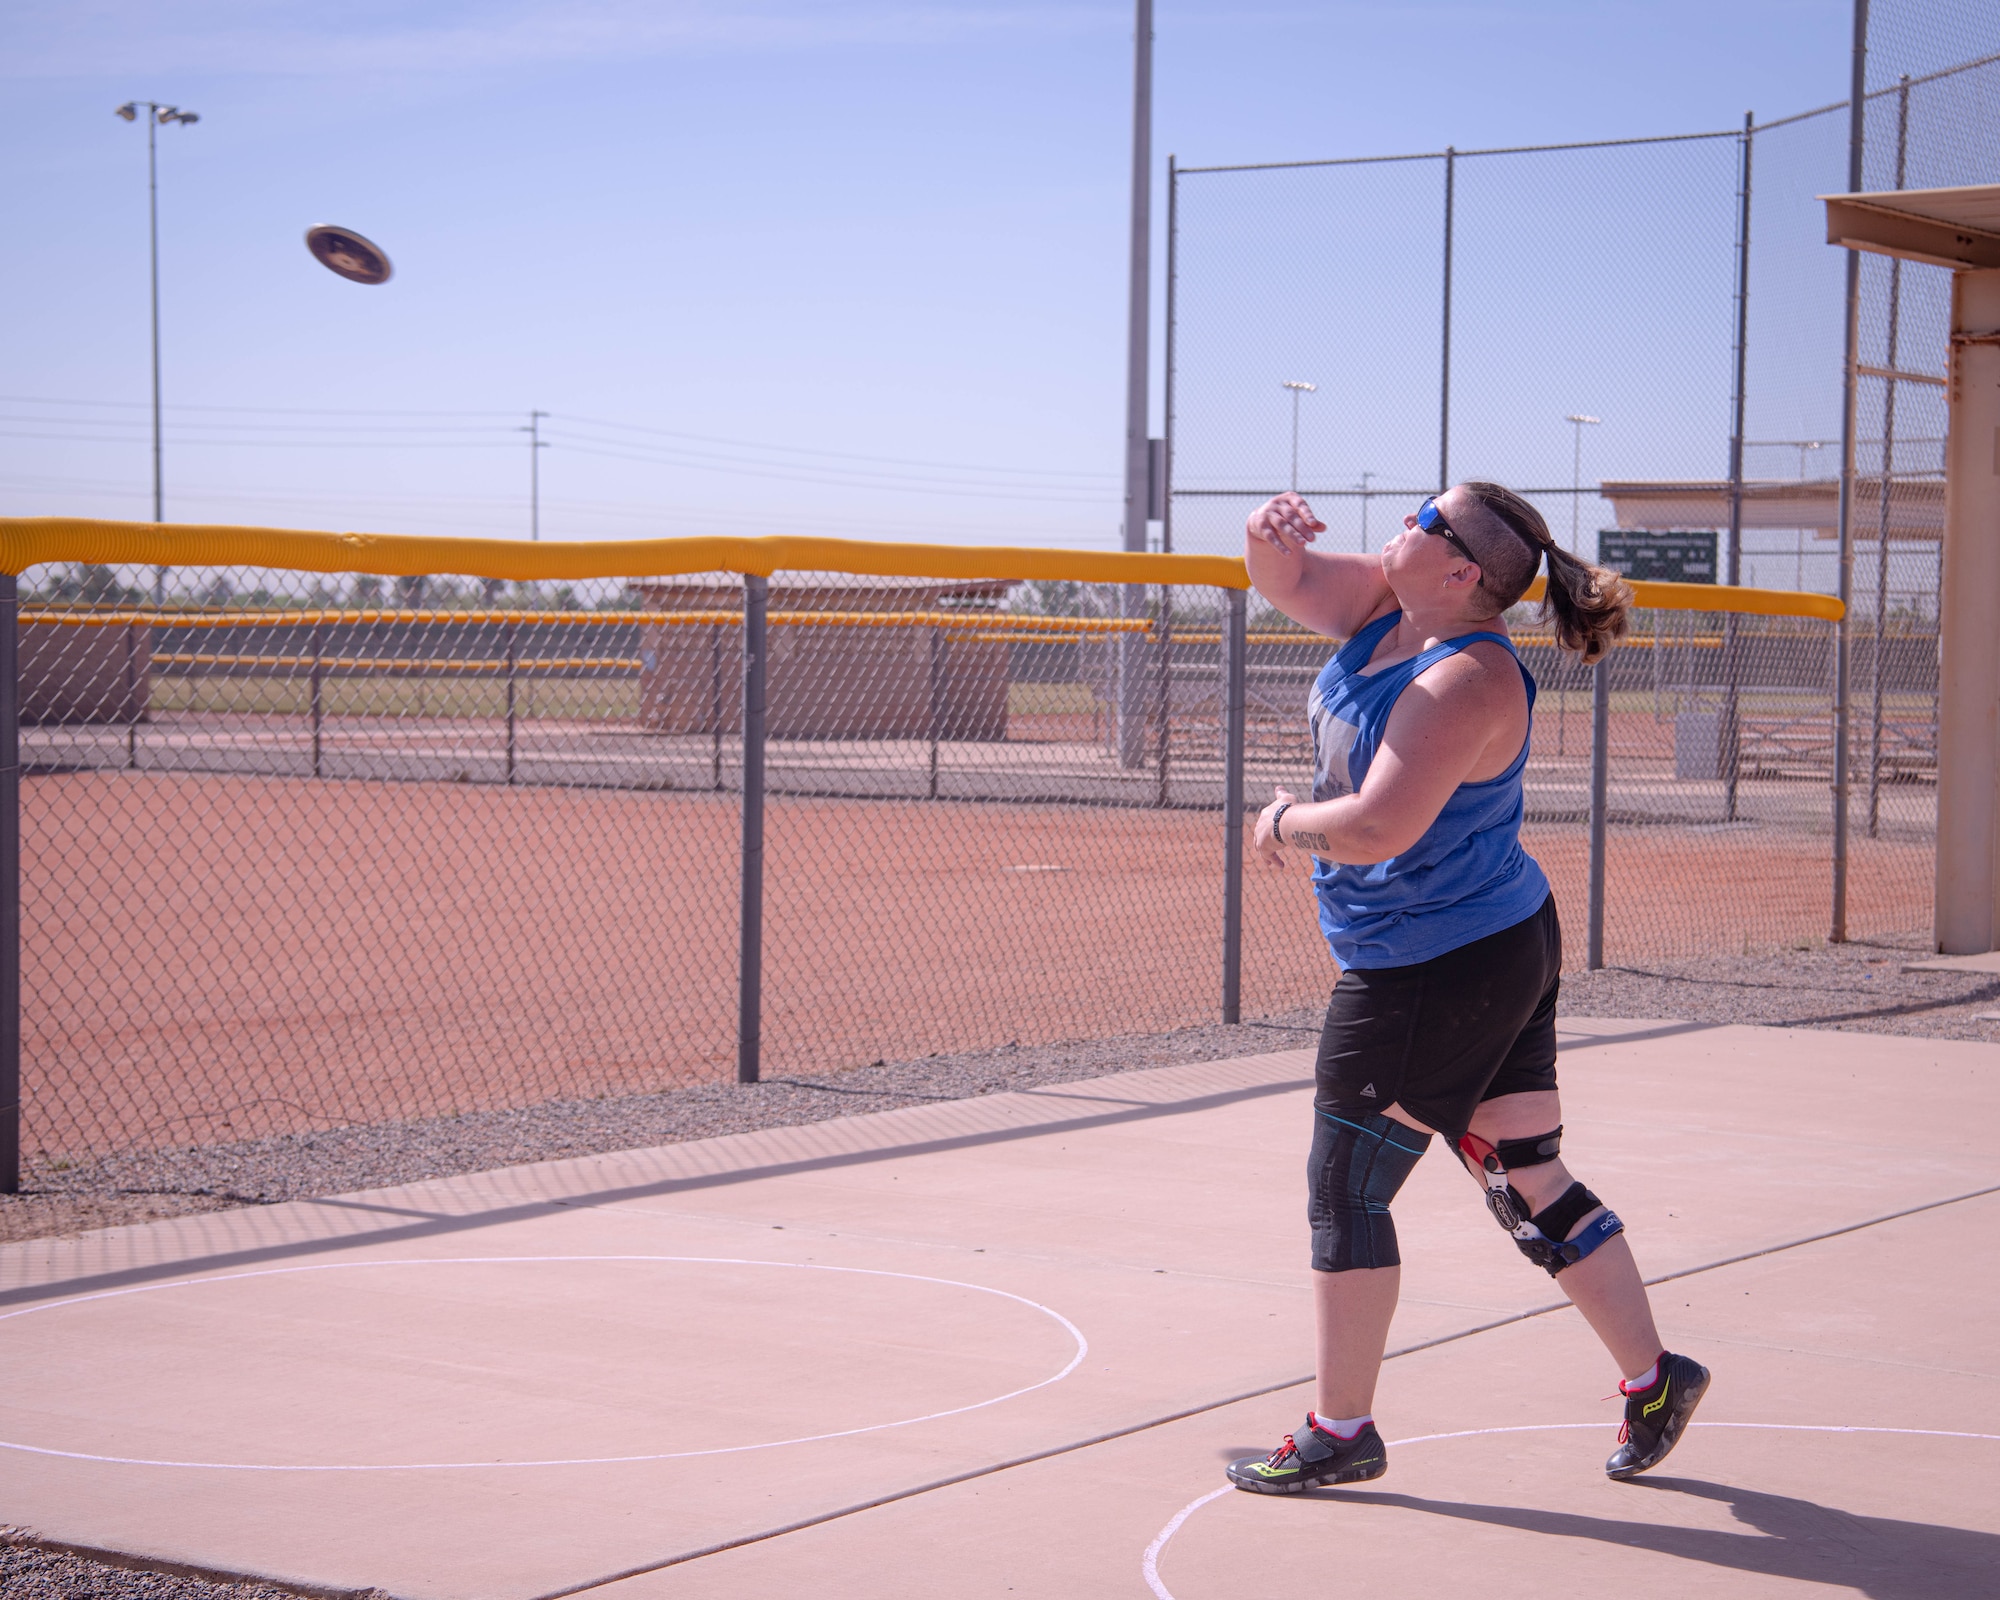 Retired U.S. Marine Staff Sgt. Beth Grauer throws a discus during the Desert Challenge Track and Field Training Camp May 25, 2021, at Luke Air Force Base, Arizona.